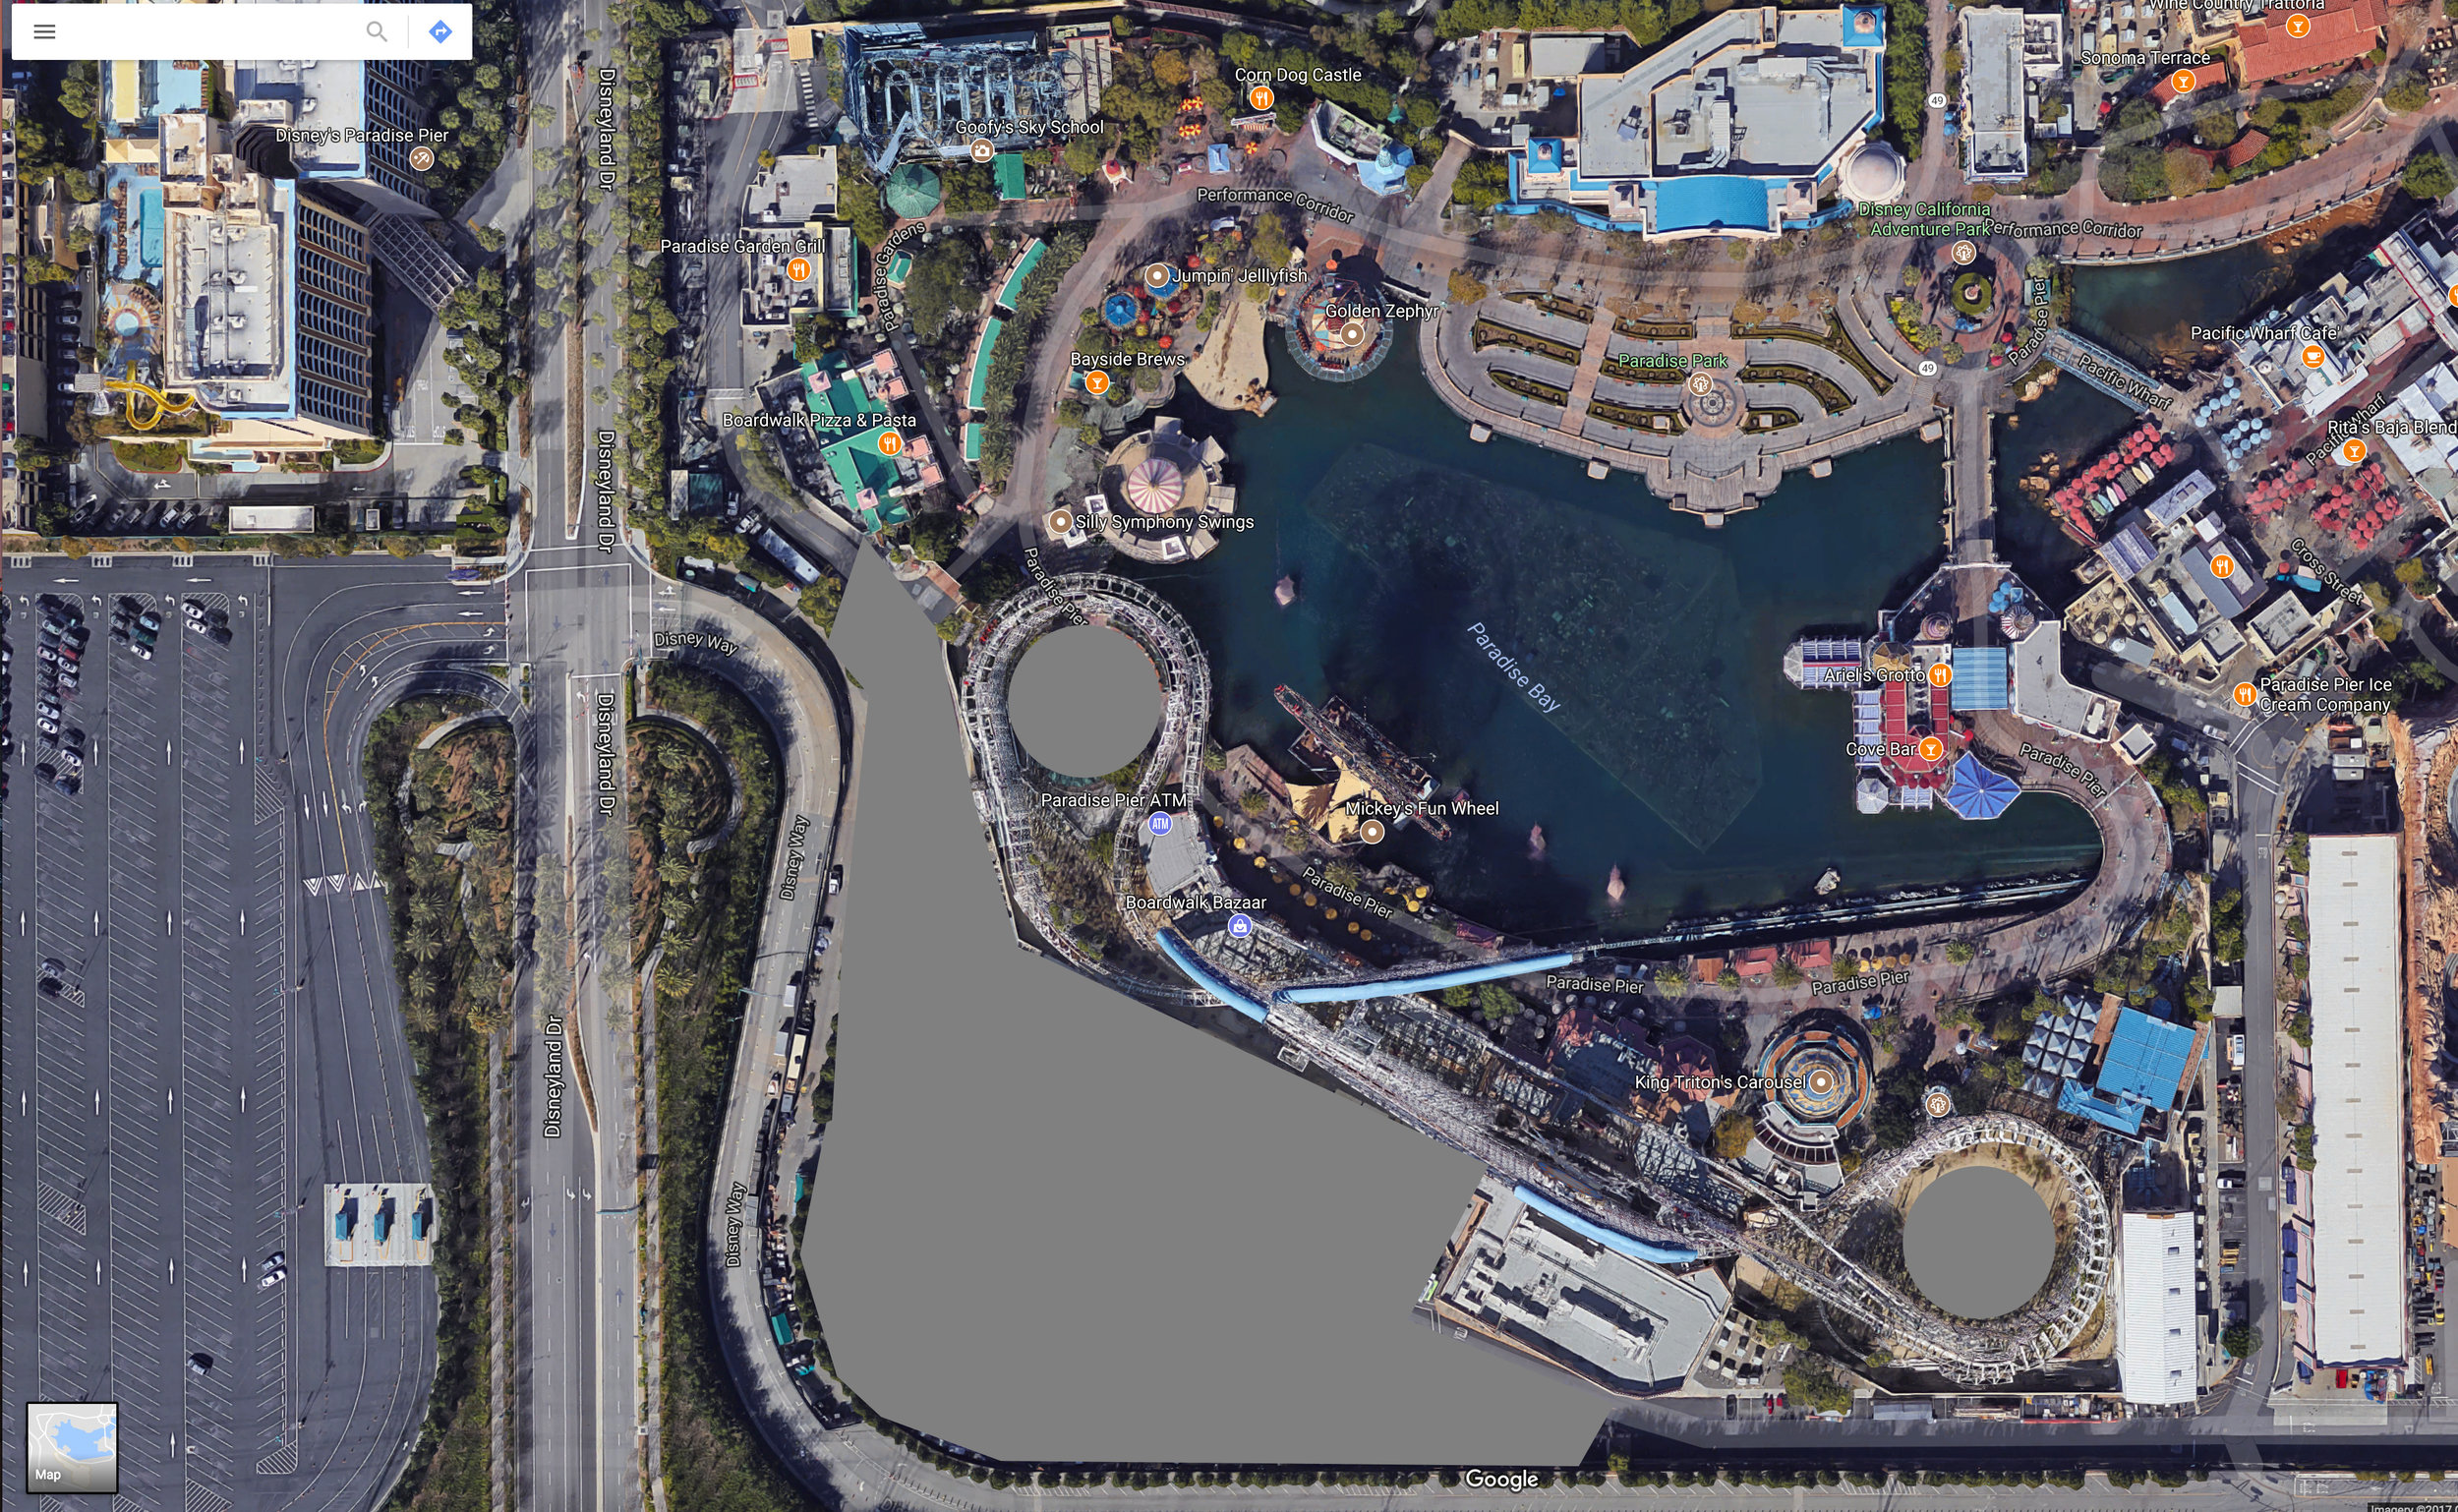  Short term amount of backstage land that could be opened up as themed environment. 